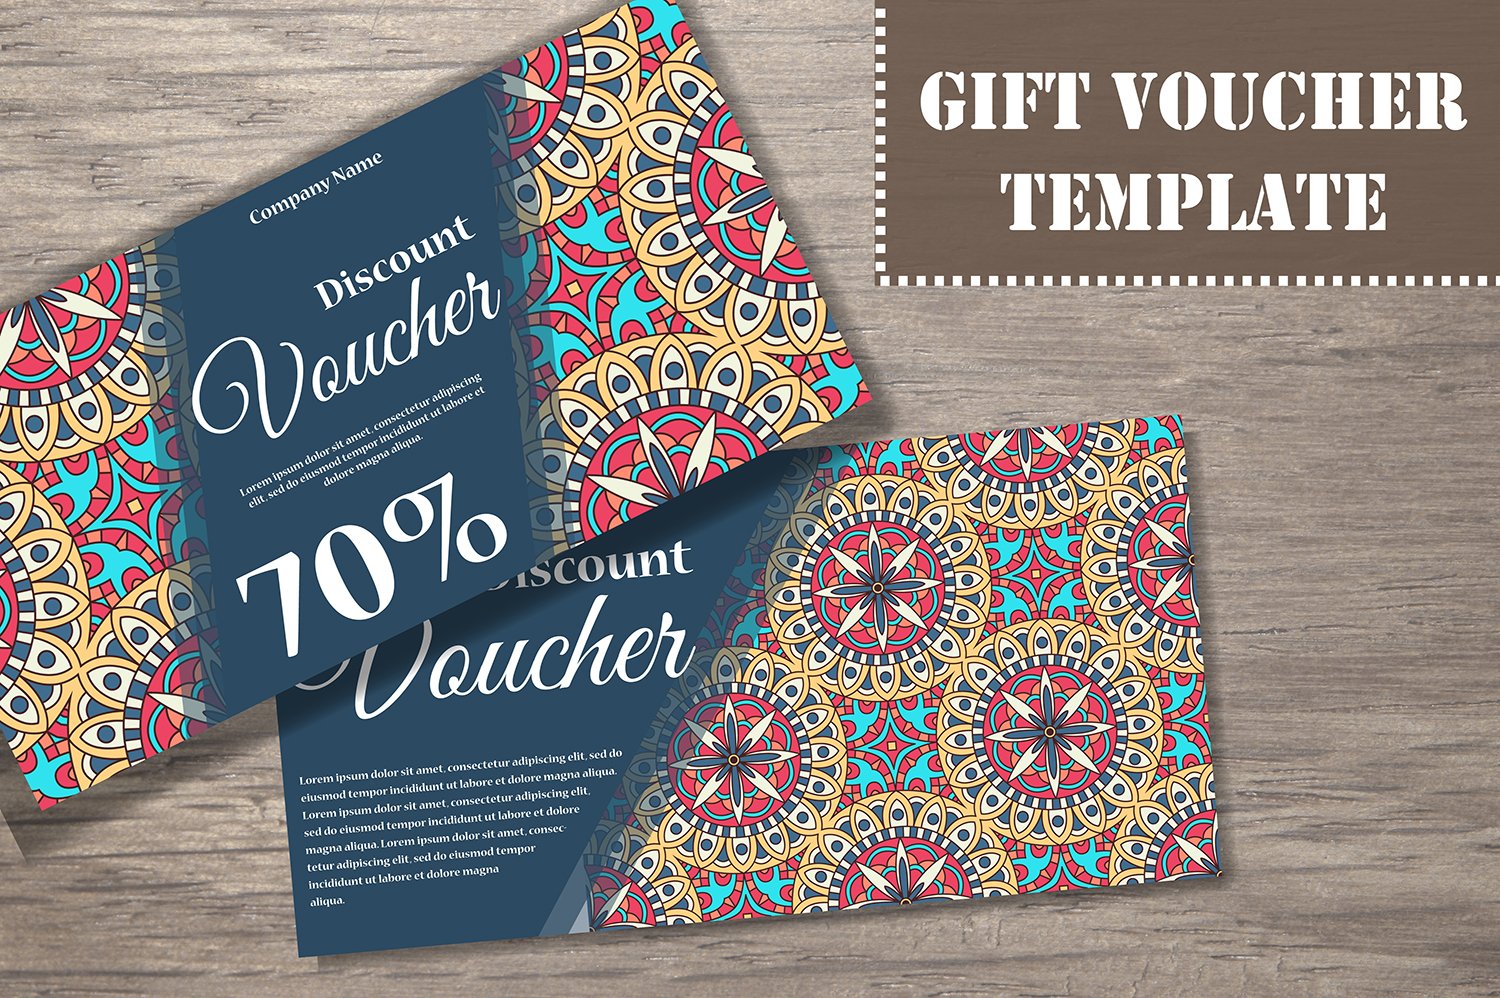 Set of gift voucher templates cover image.